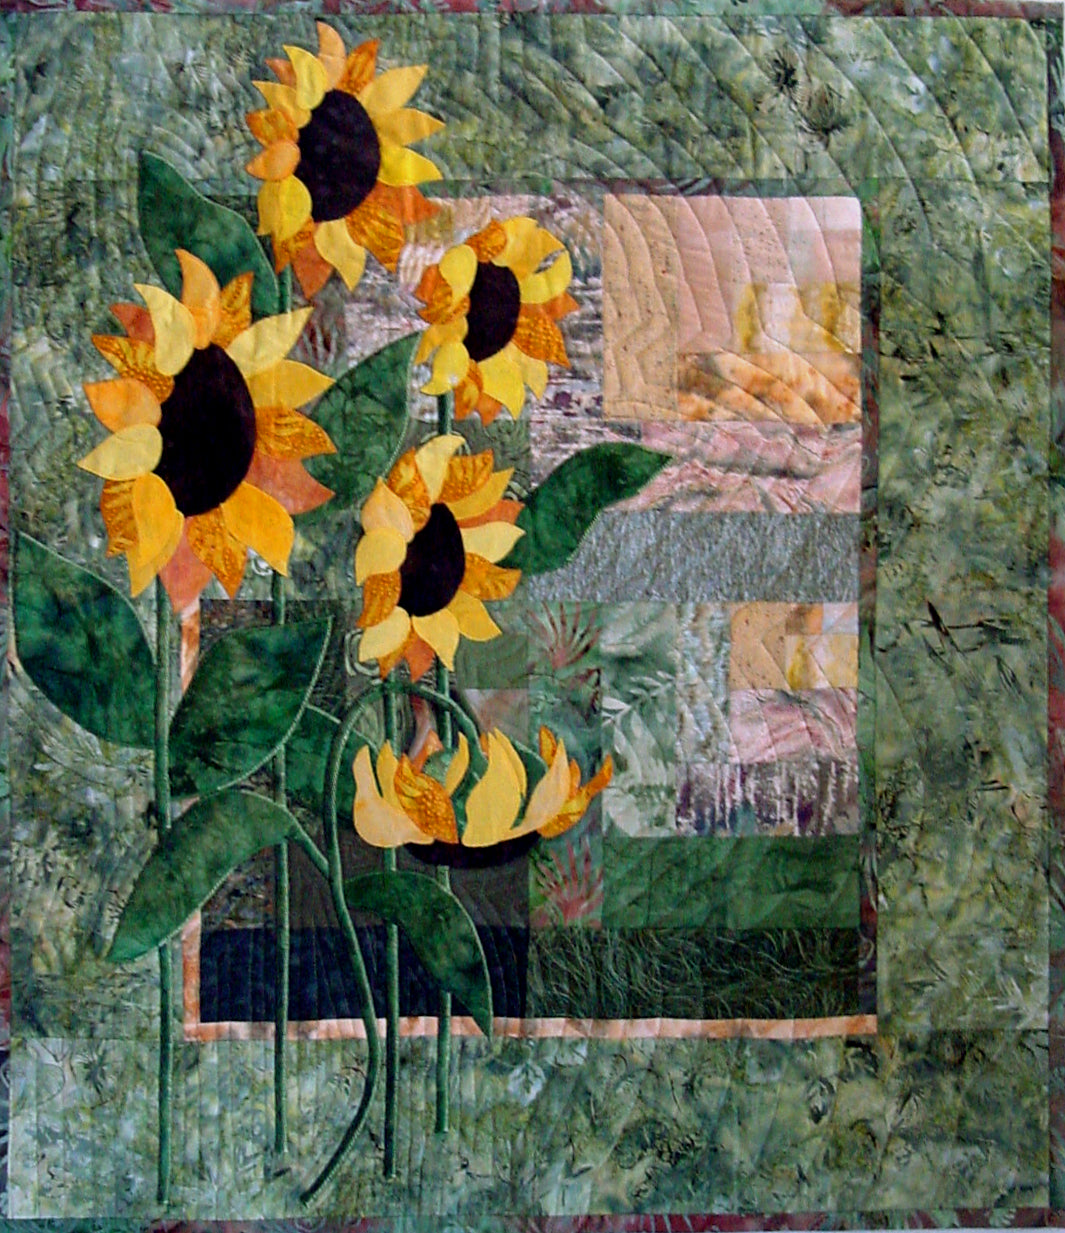 a classic sunflower quilt pattern by Ruth Blanchet created with applique sunflowers and an offset log cabin block background